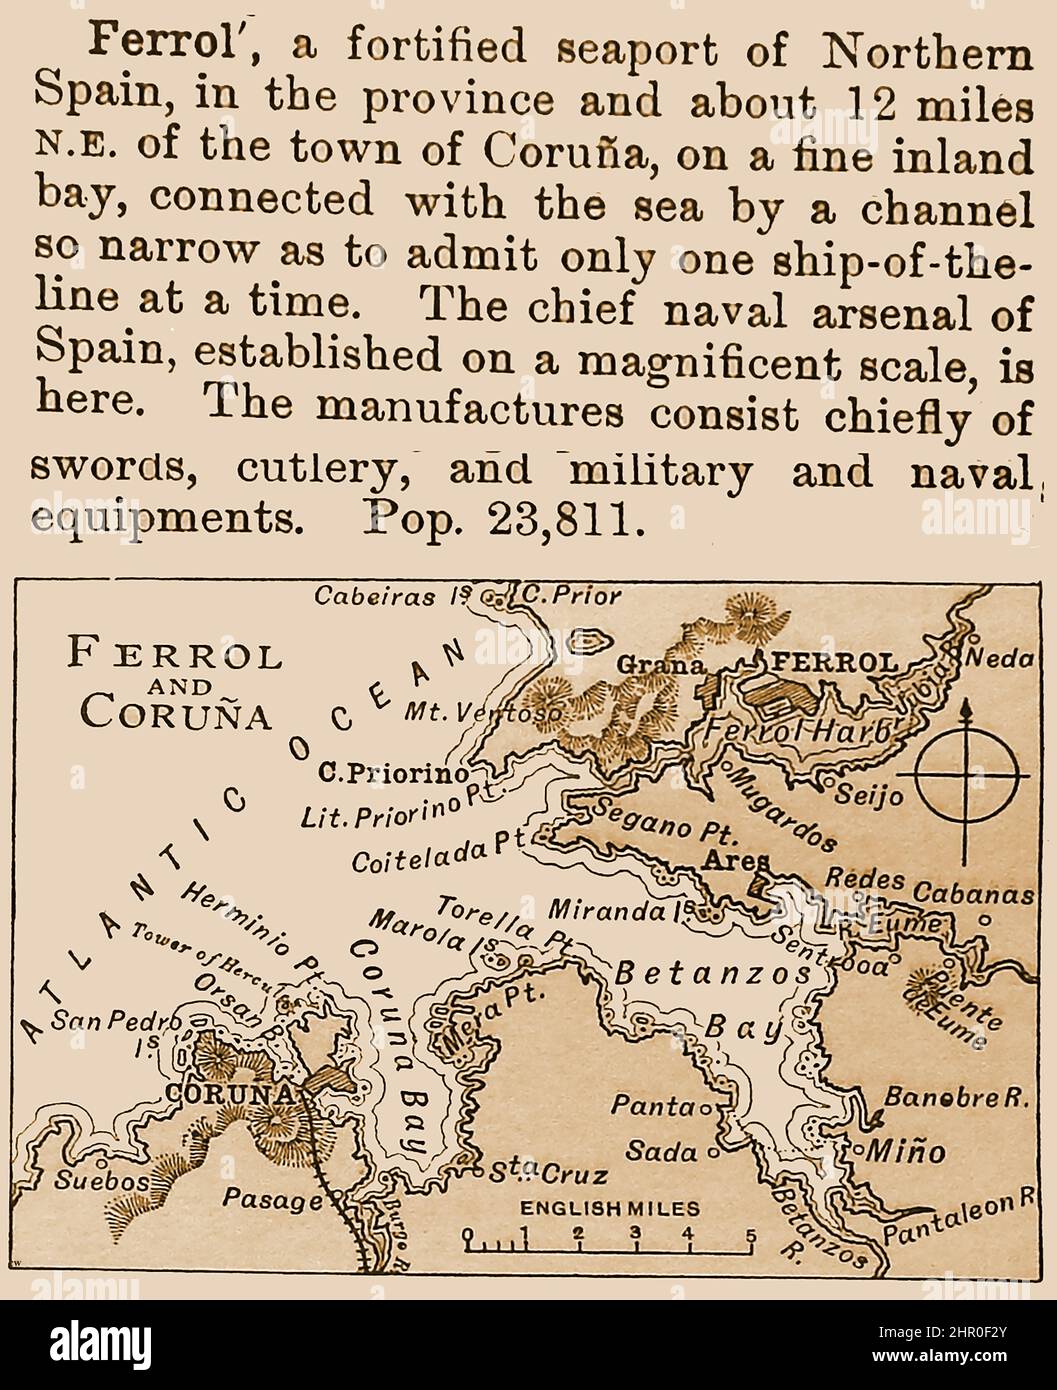 An 1896 gazetteer entry for Ferrol and Coruna , Spain with map and description of harbour entrance, naval arsenal, and industries (swords, cutlery. military and navy equipment) Stock Photo